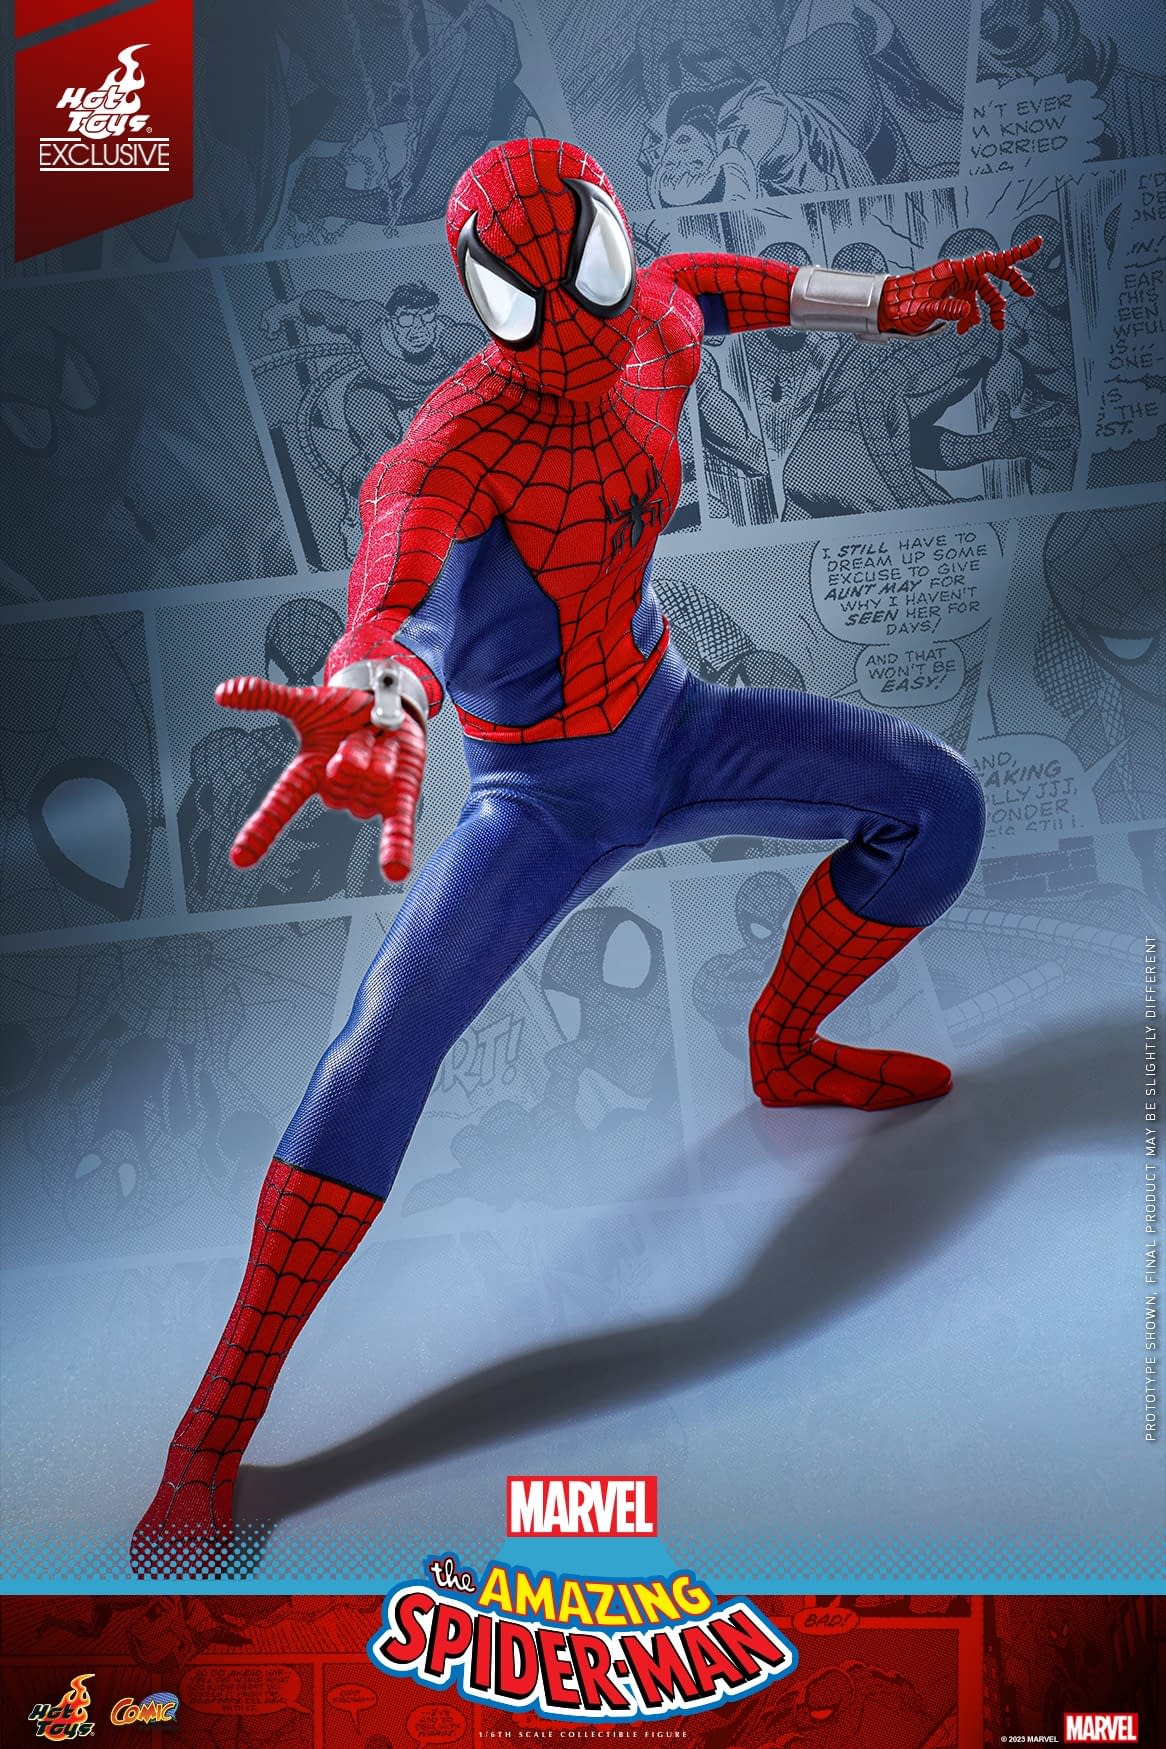 Spider-Man Receives Exclusive Marvel Comics 1/6 Figure from Hot Toys5